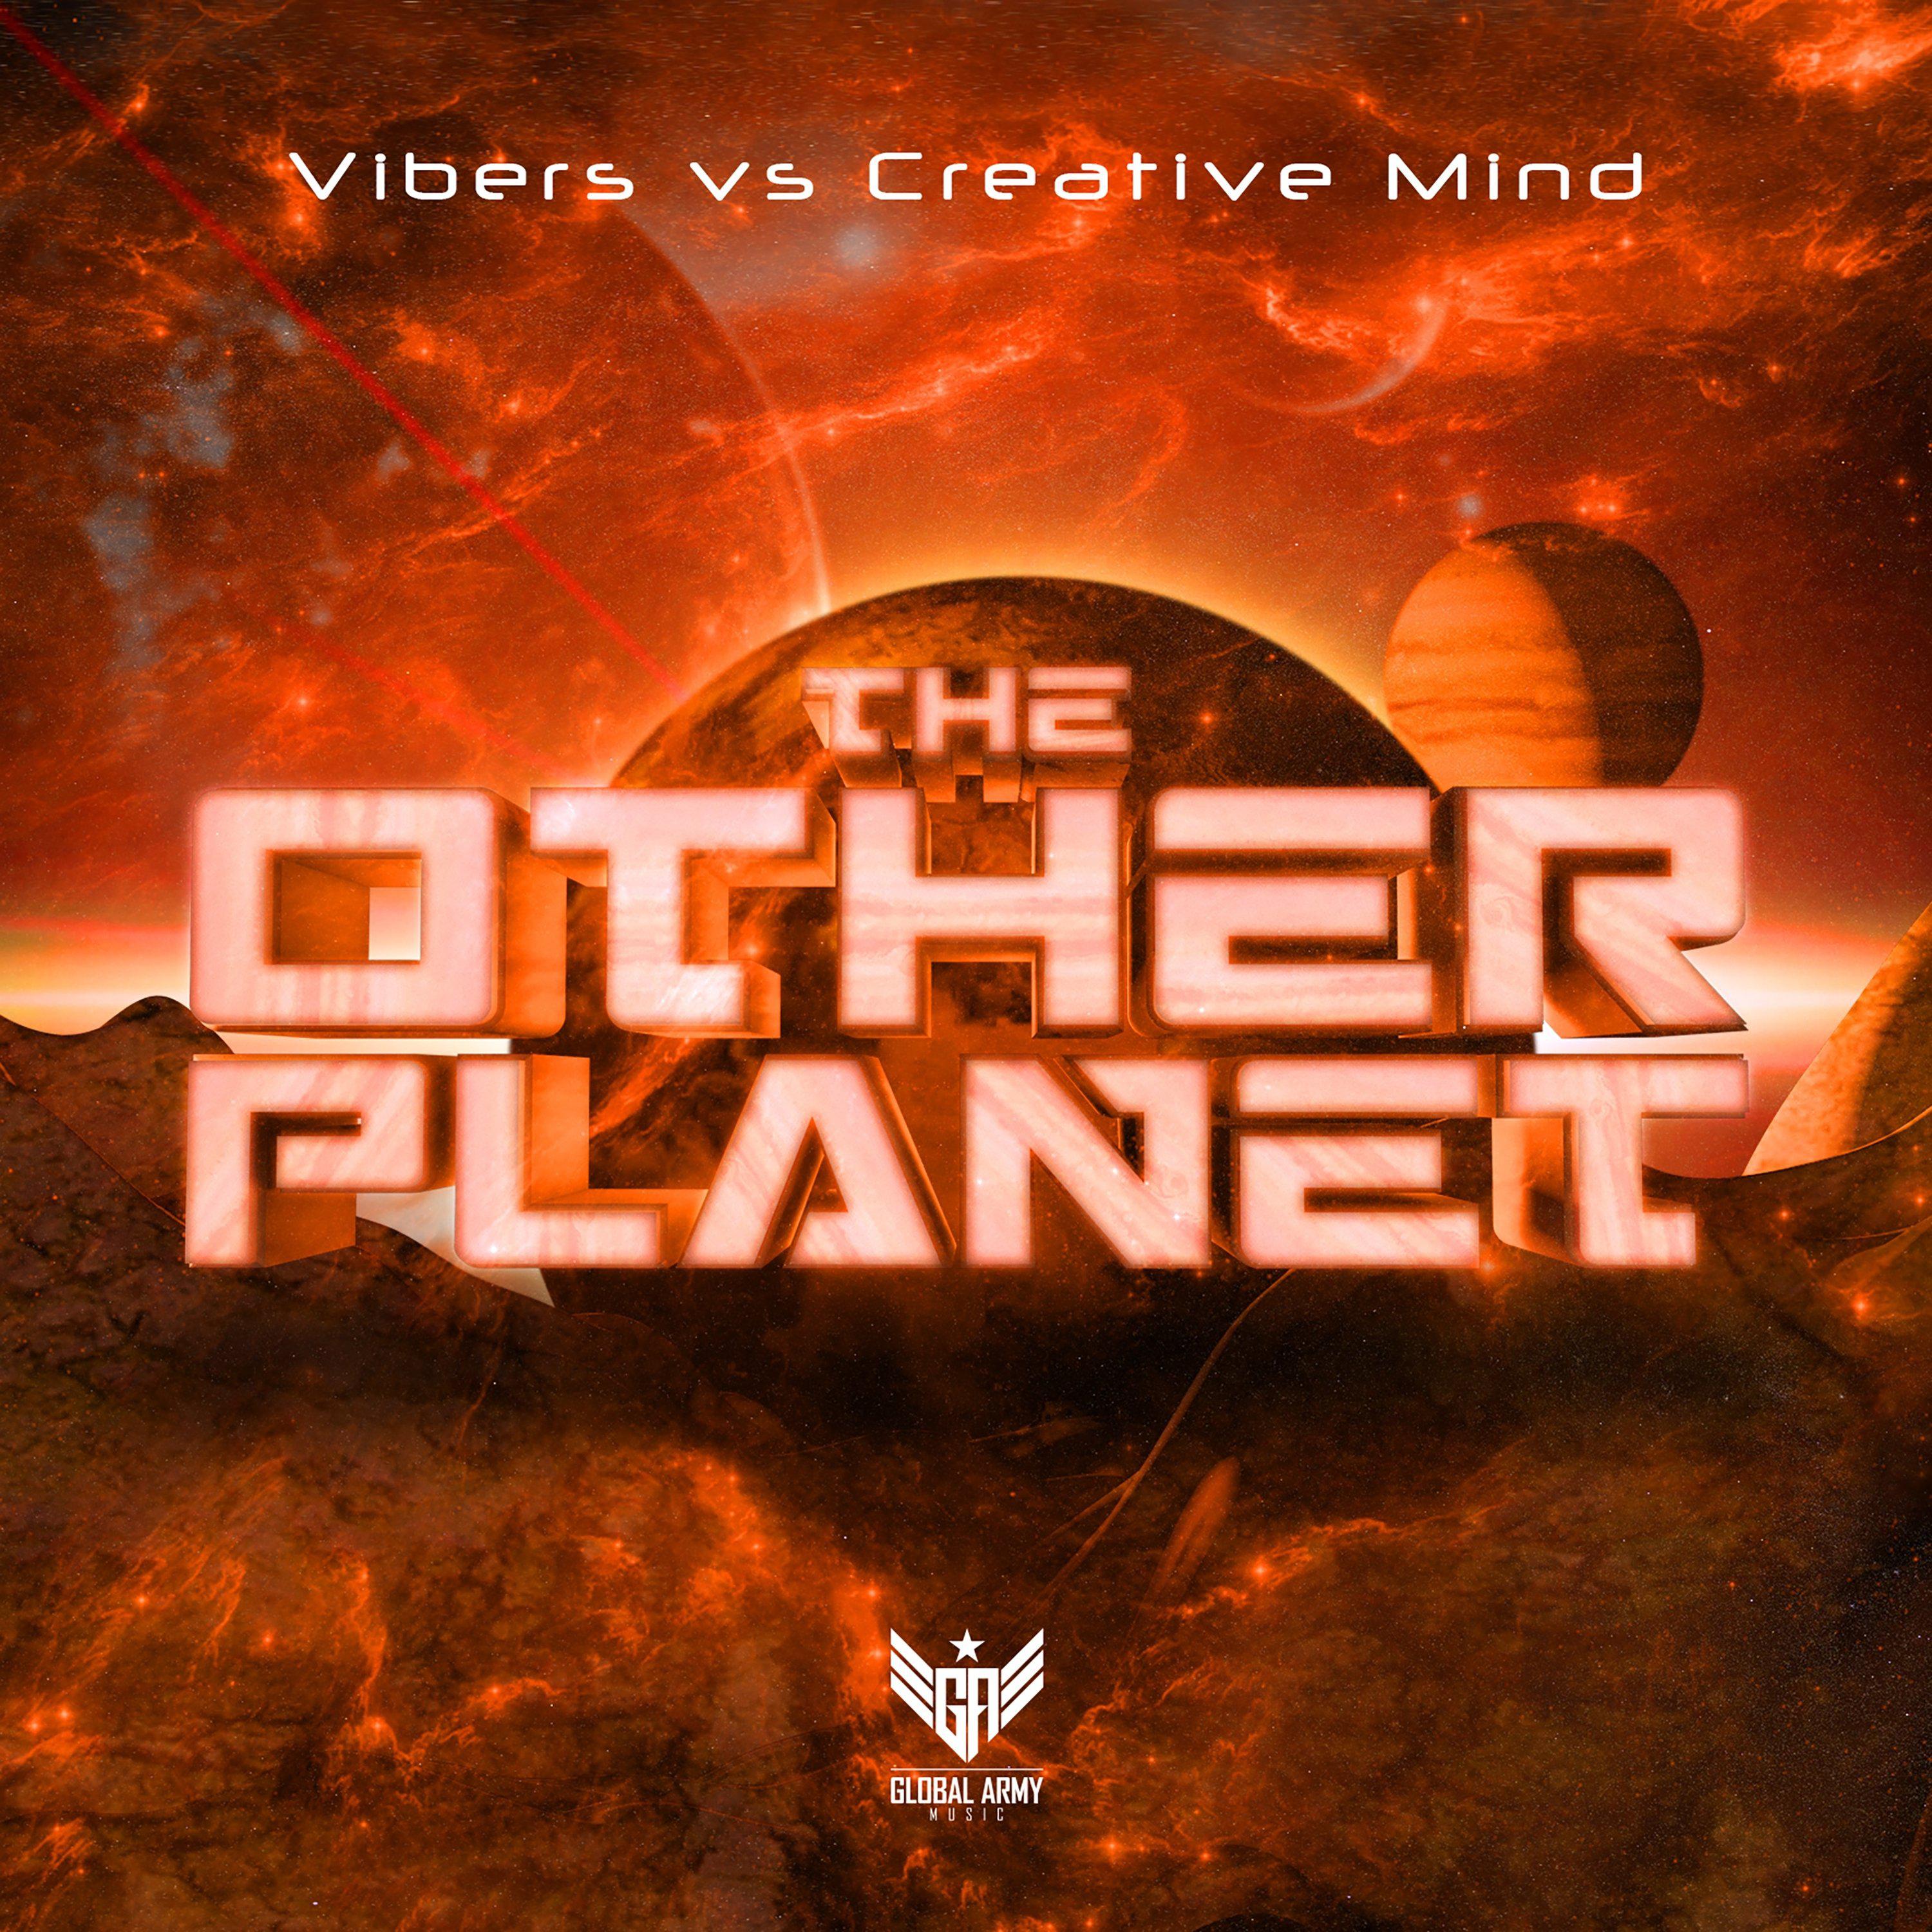 Vibers - The Other Planet (Original Mix)